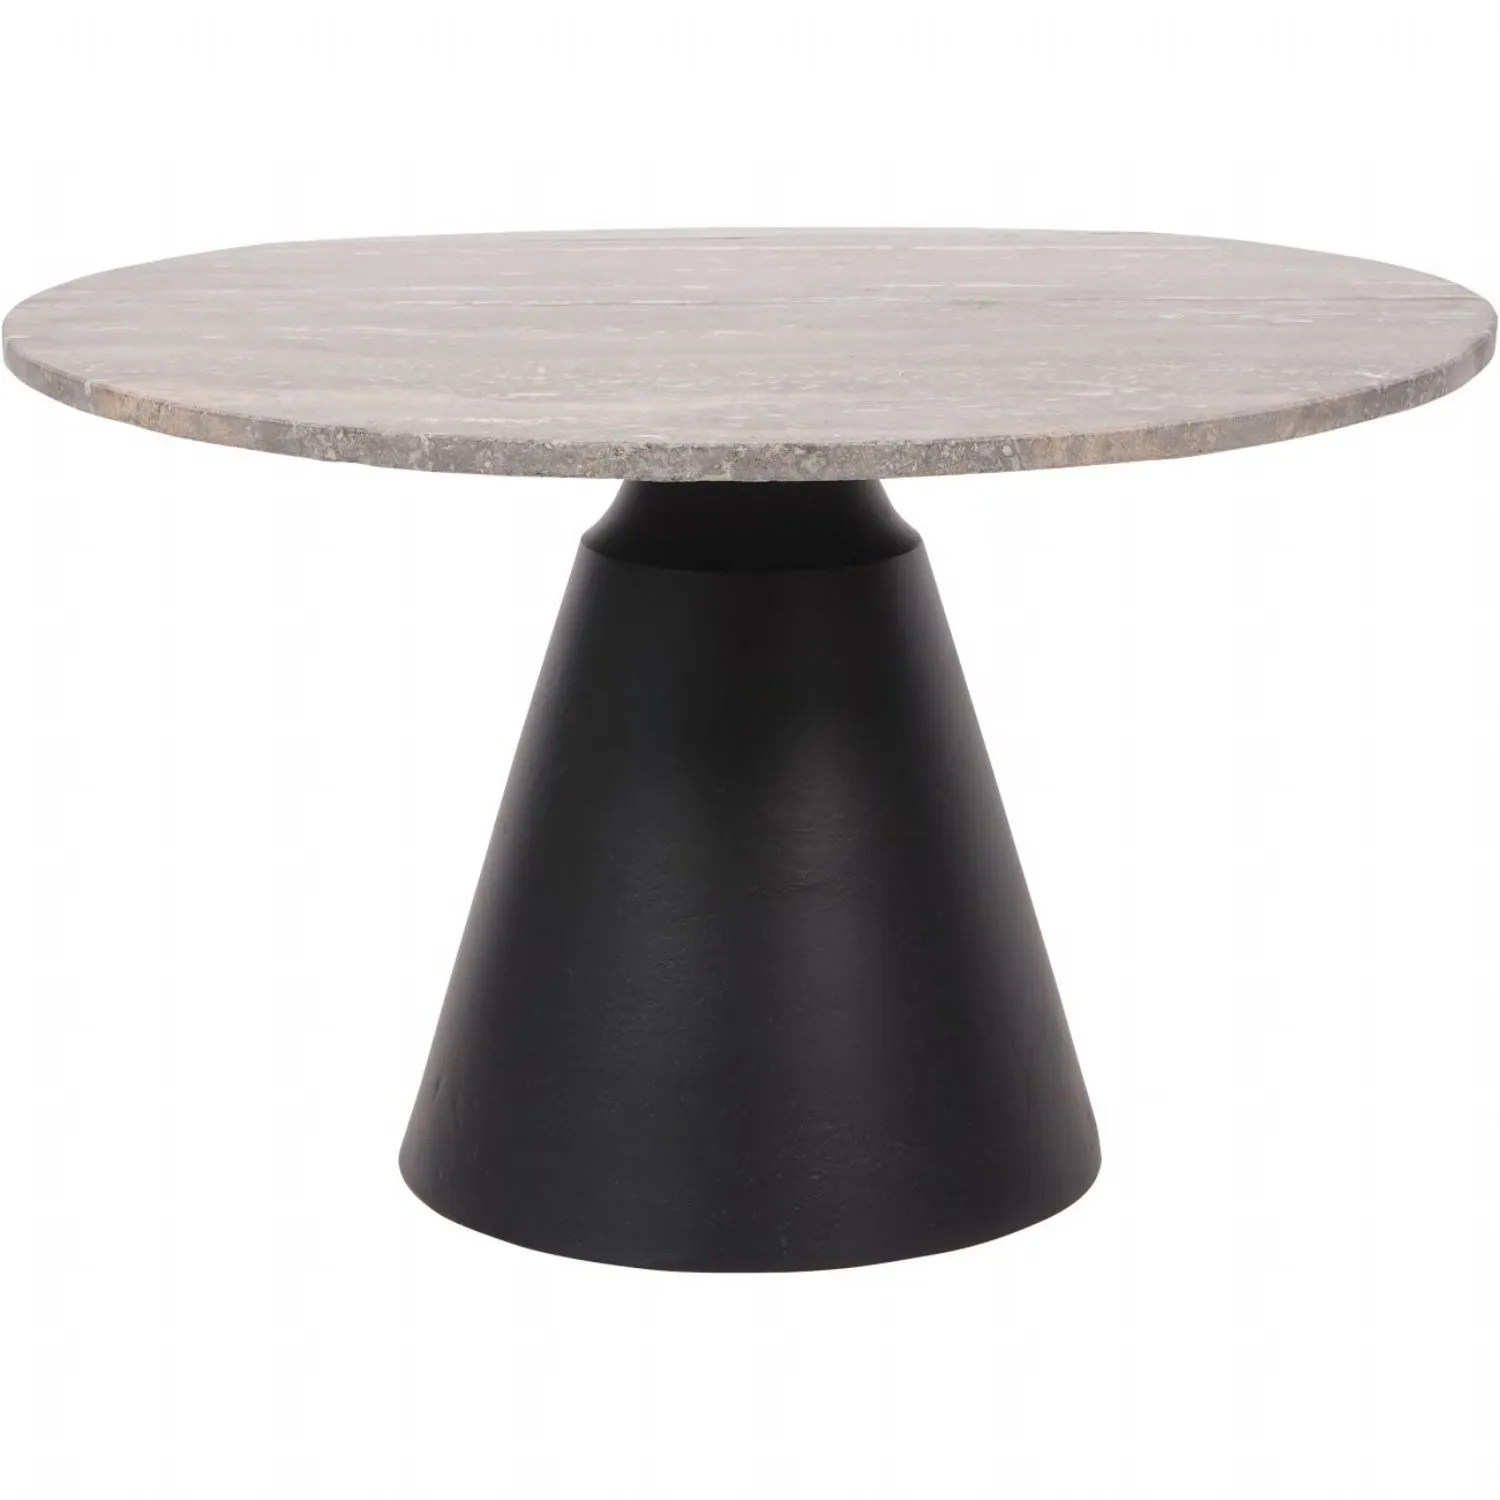 Clifton II Charcoal Black and Dark Travertine Coffee Table Small 60cm